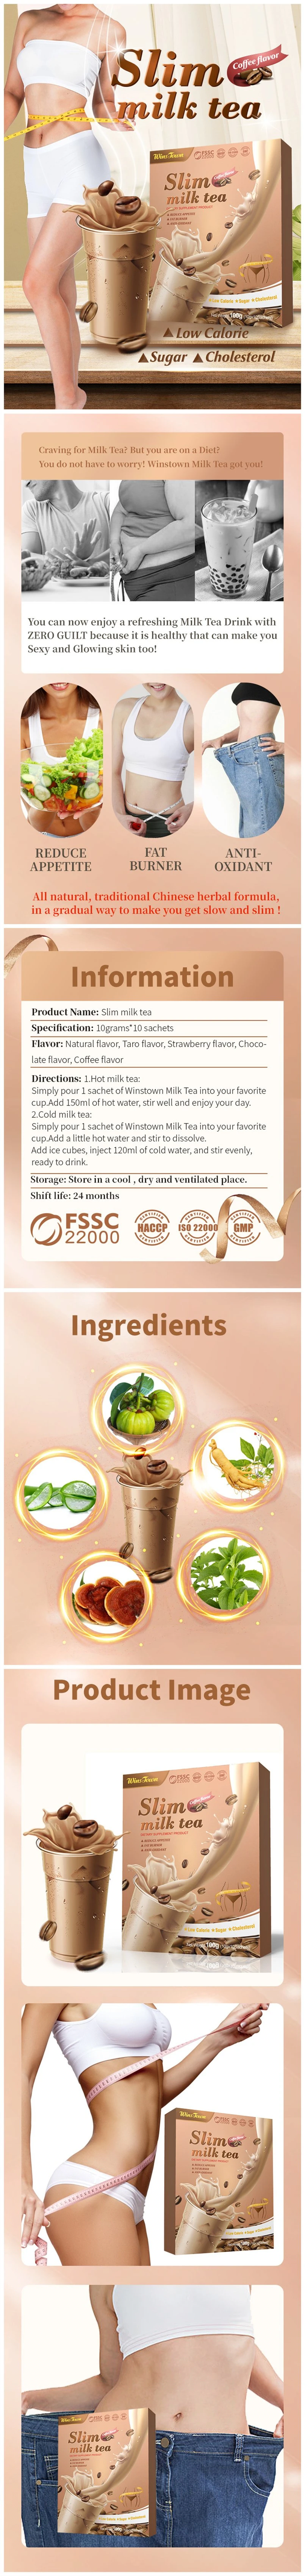 Winstown Slim Coffee Flavor Milk Tea Natural Slimming Weight Loss Instant Coffee Meal Replacement Powder Fit Weight